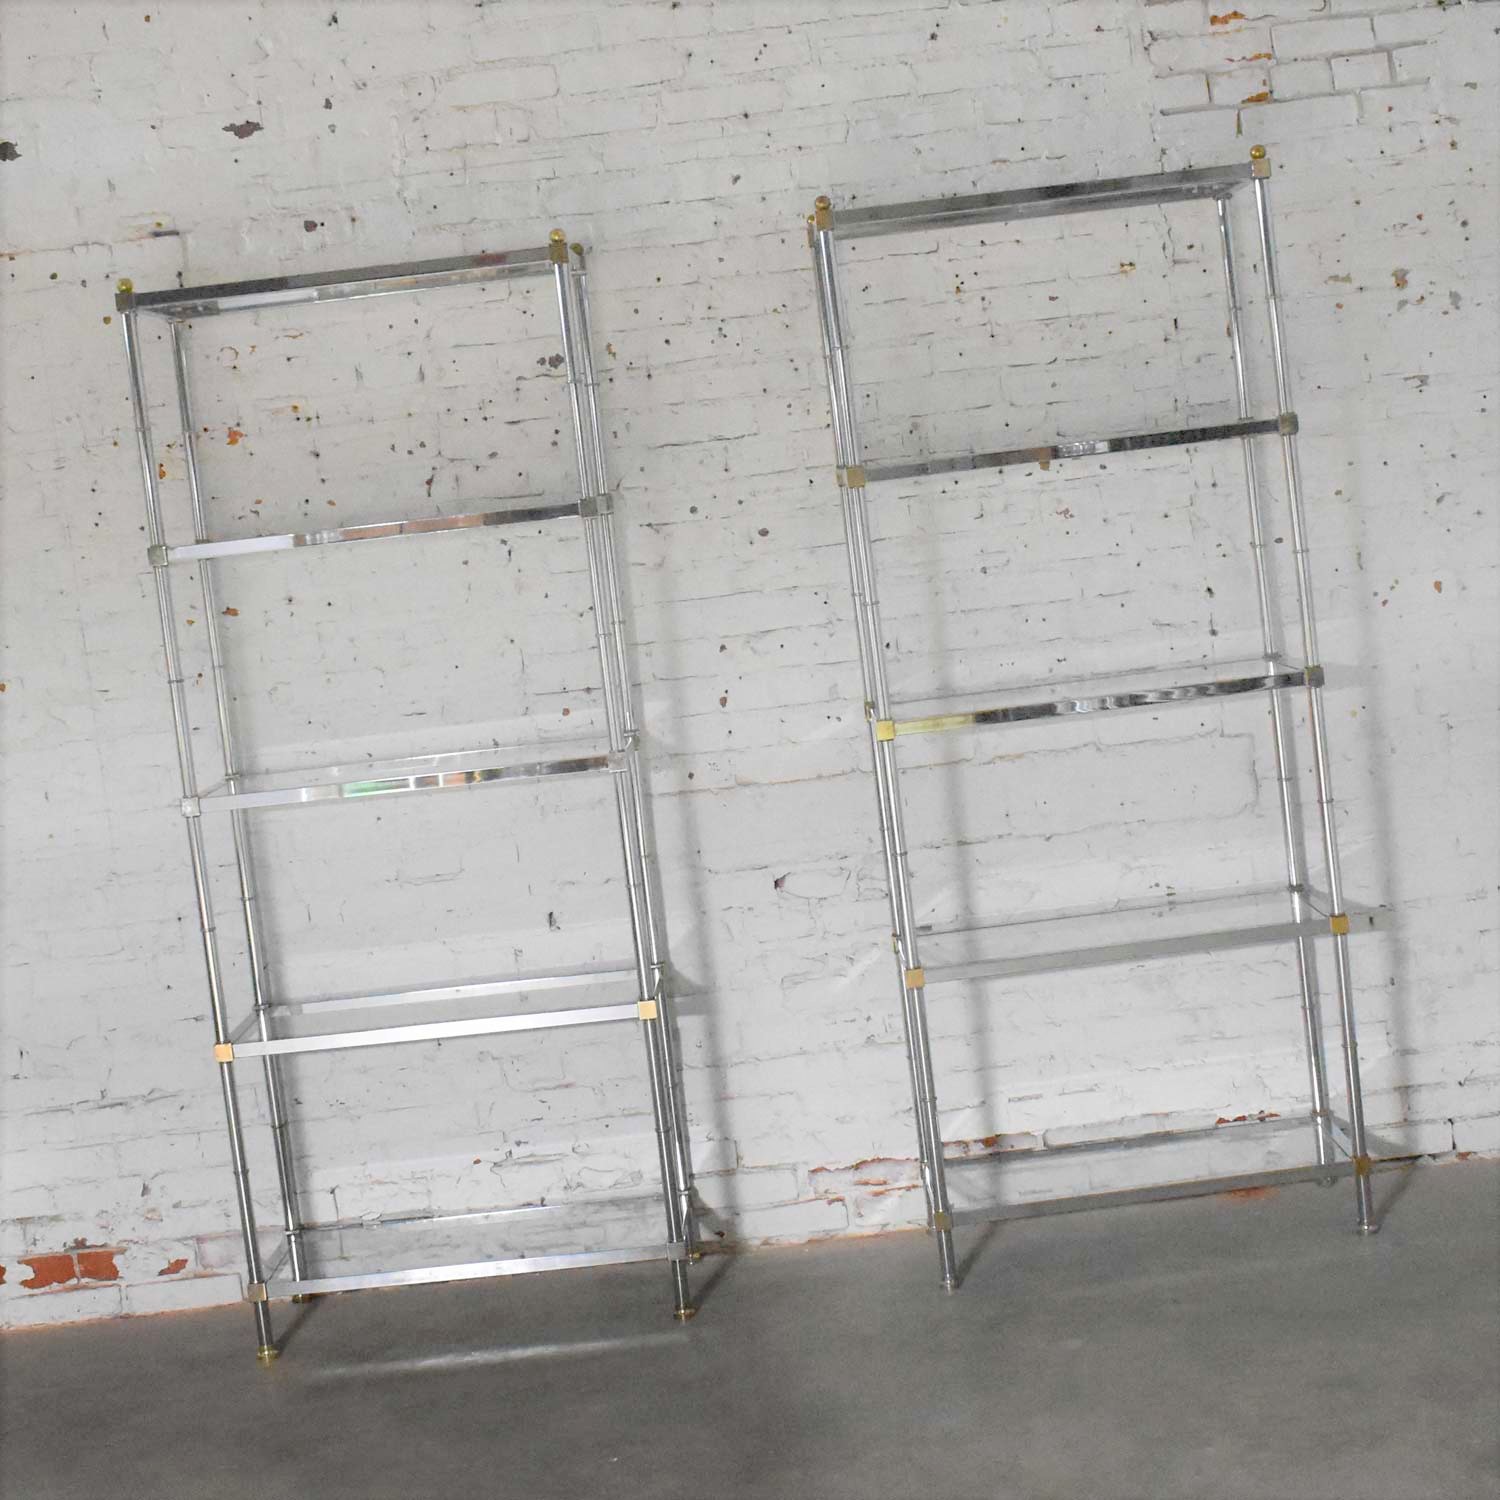 Pair of Vintage Etagere Display Shelves in Chrome and Brass, Manner of Maison Jansen